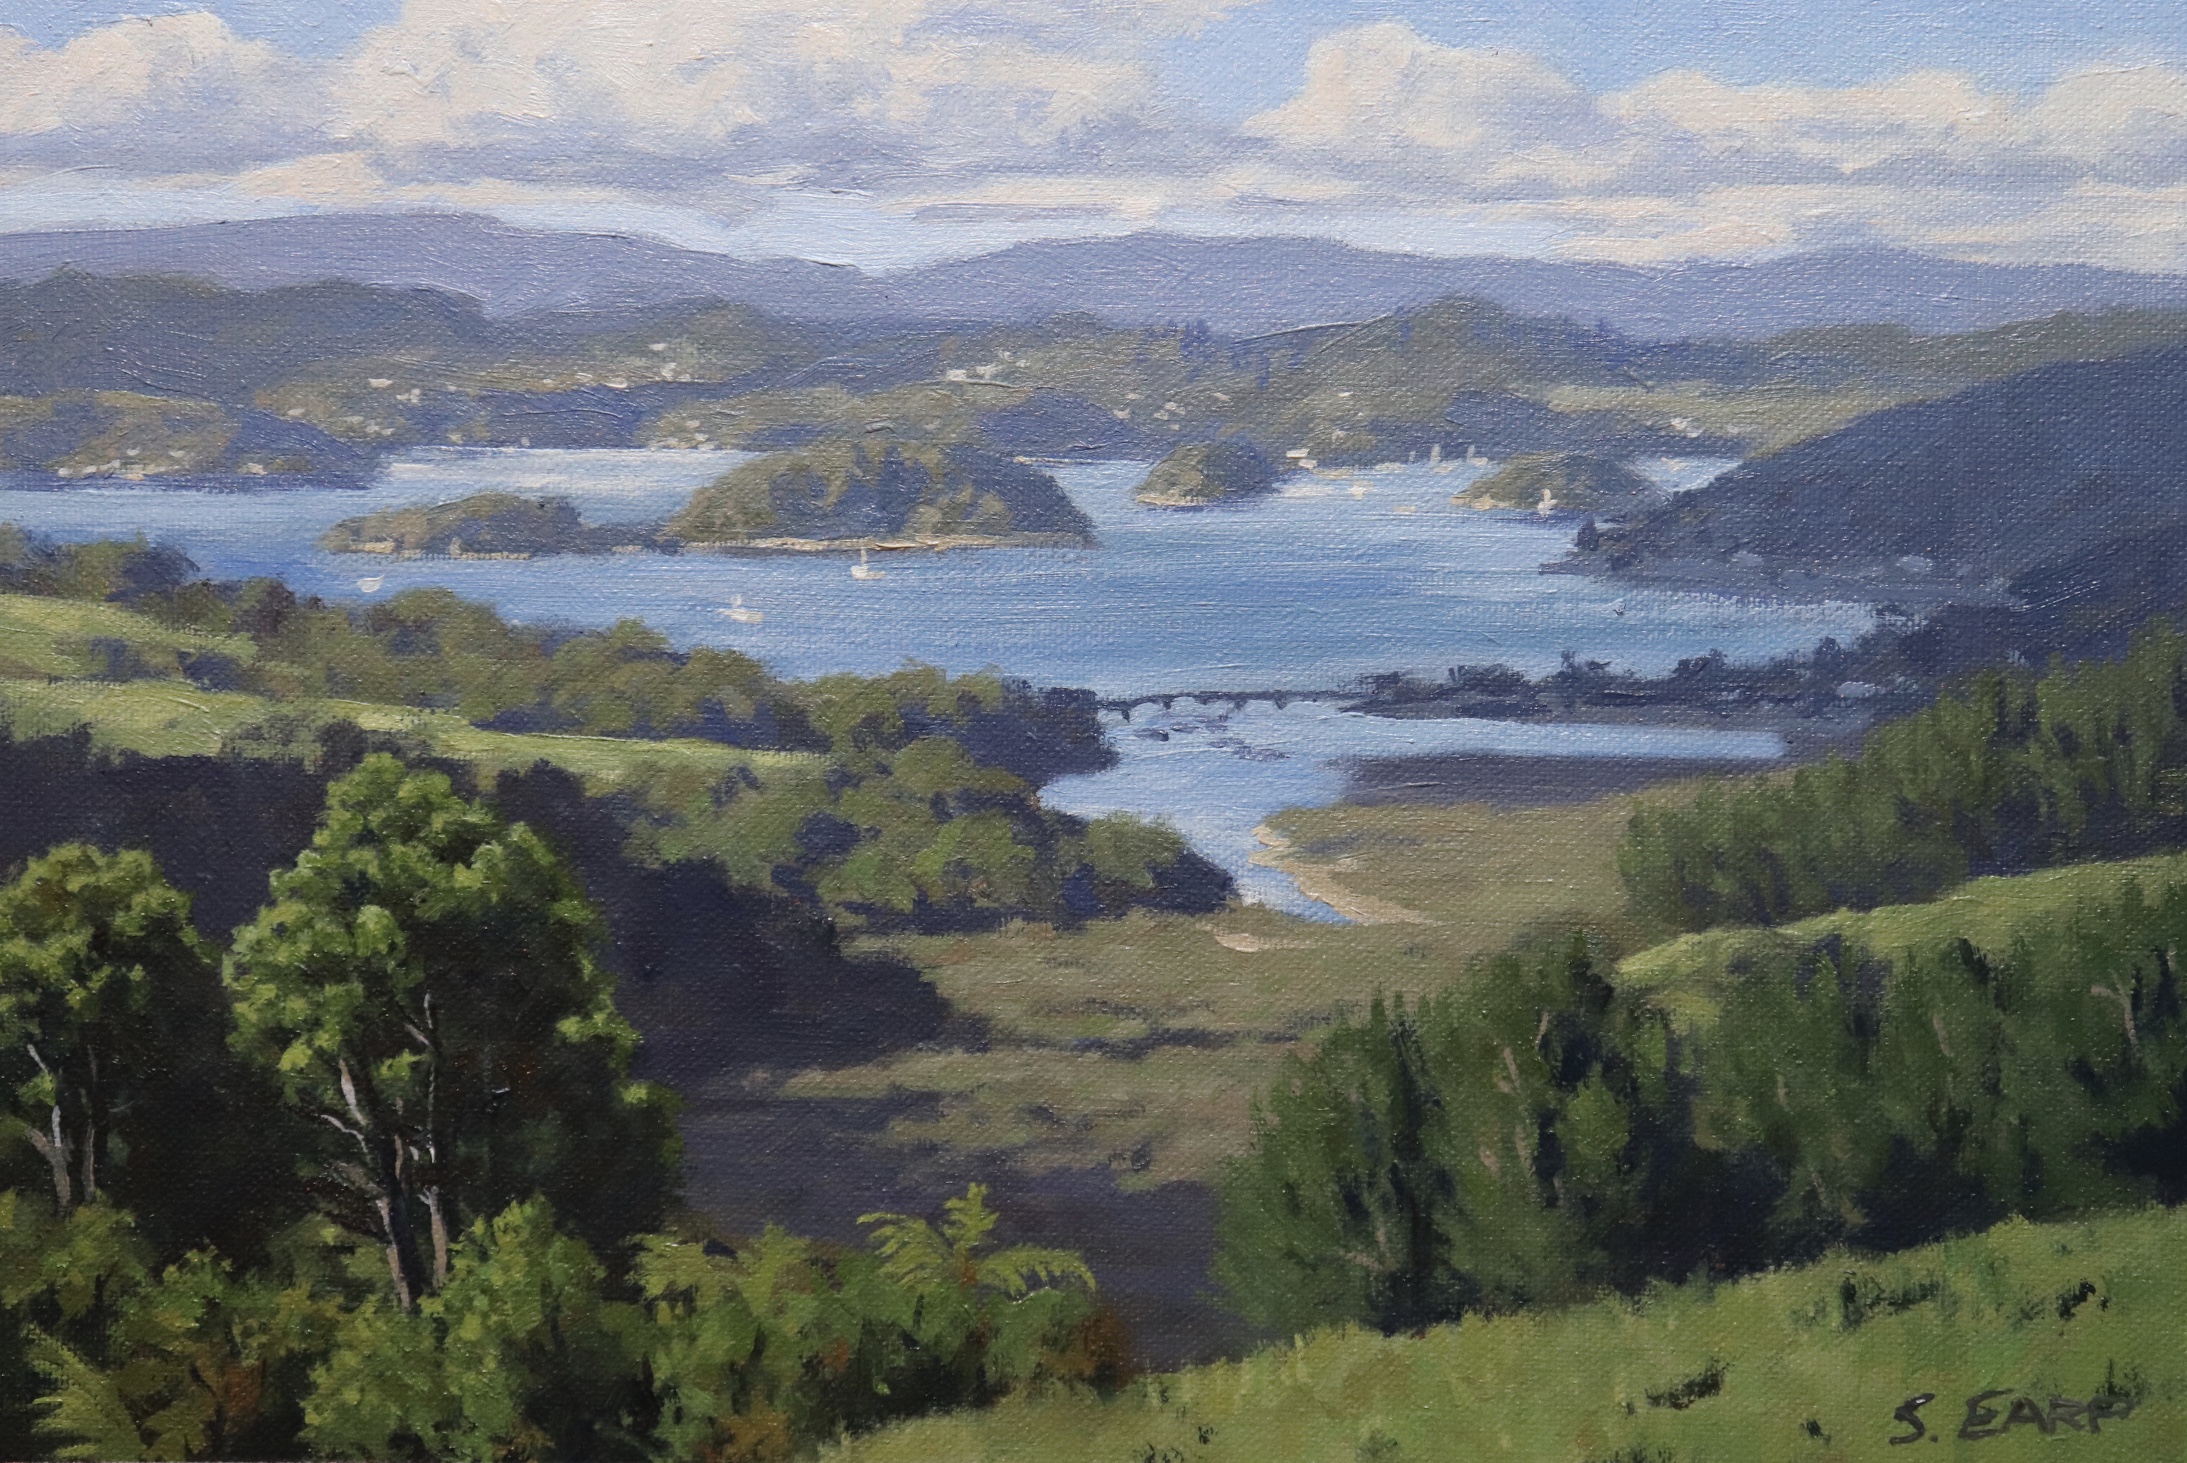 Bay of Islands, New Zealand, 20cm x 30cm, oil on canvas